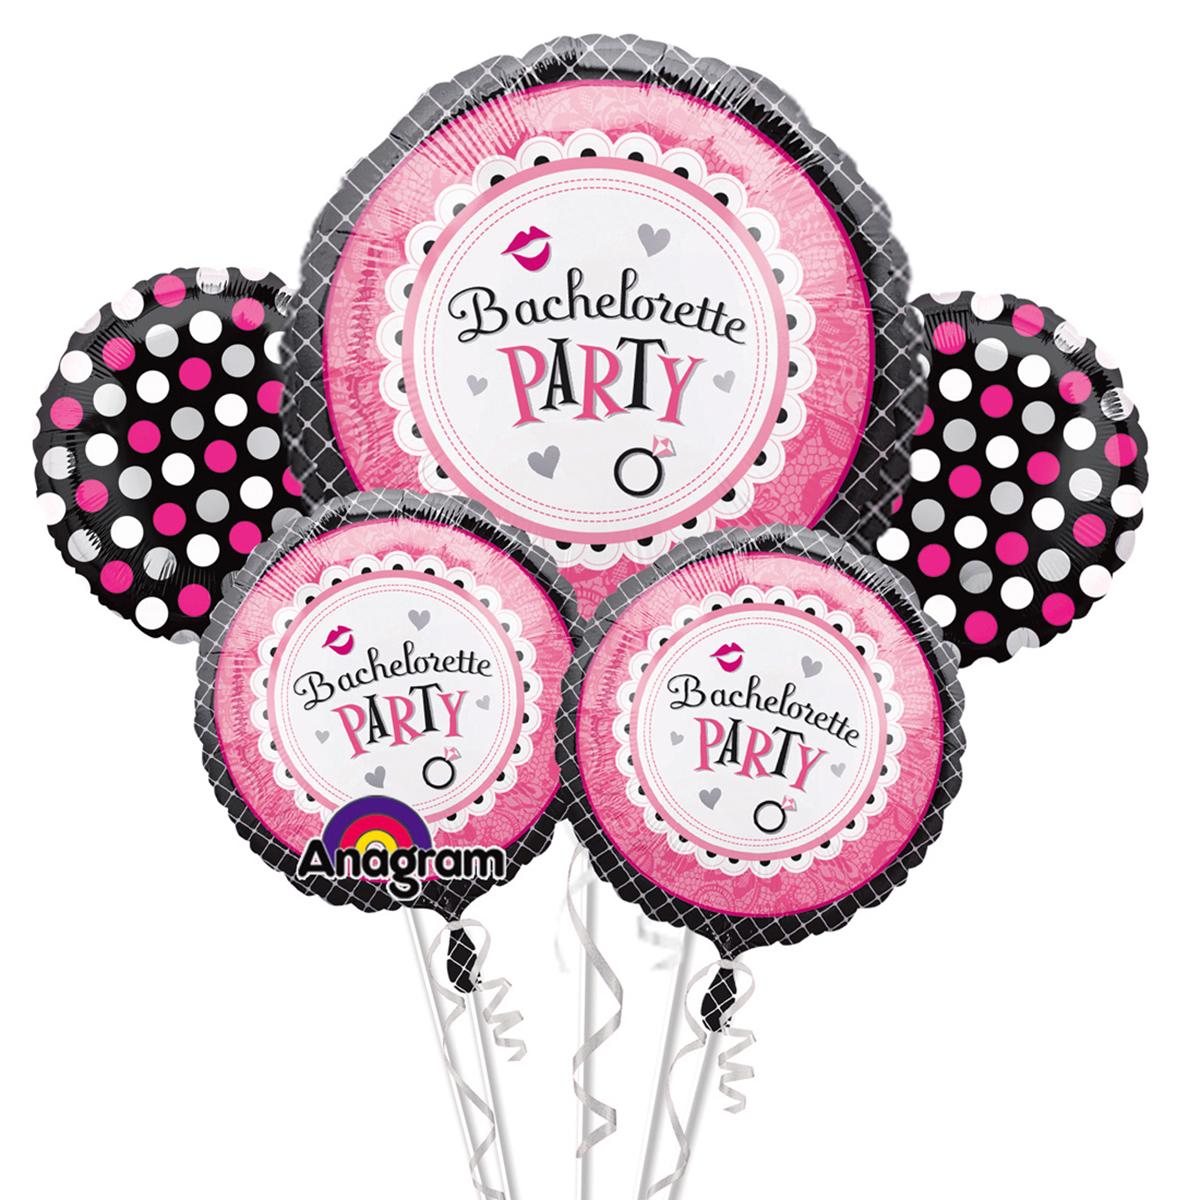 Bachelorette Party Balloon Bouquet Balloons & Streamers - Party Centre - Party Centre